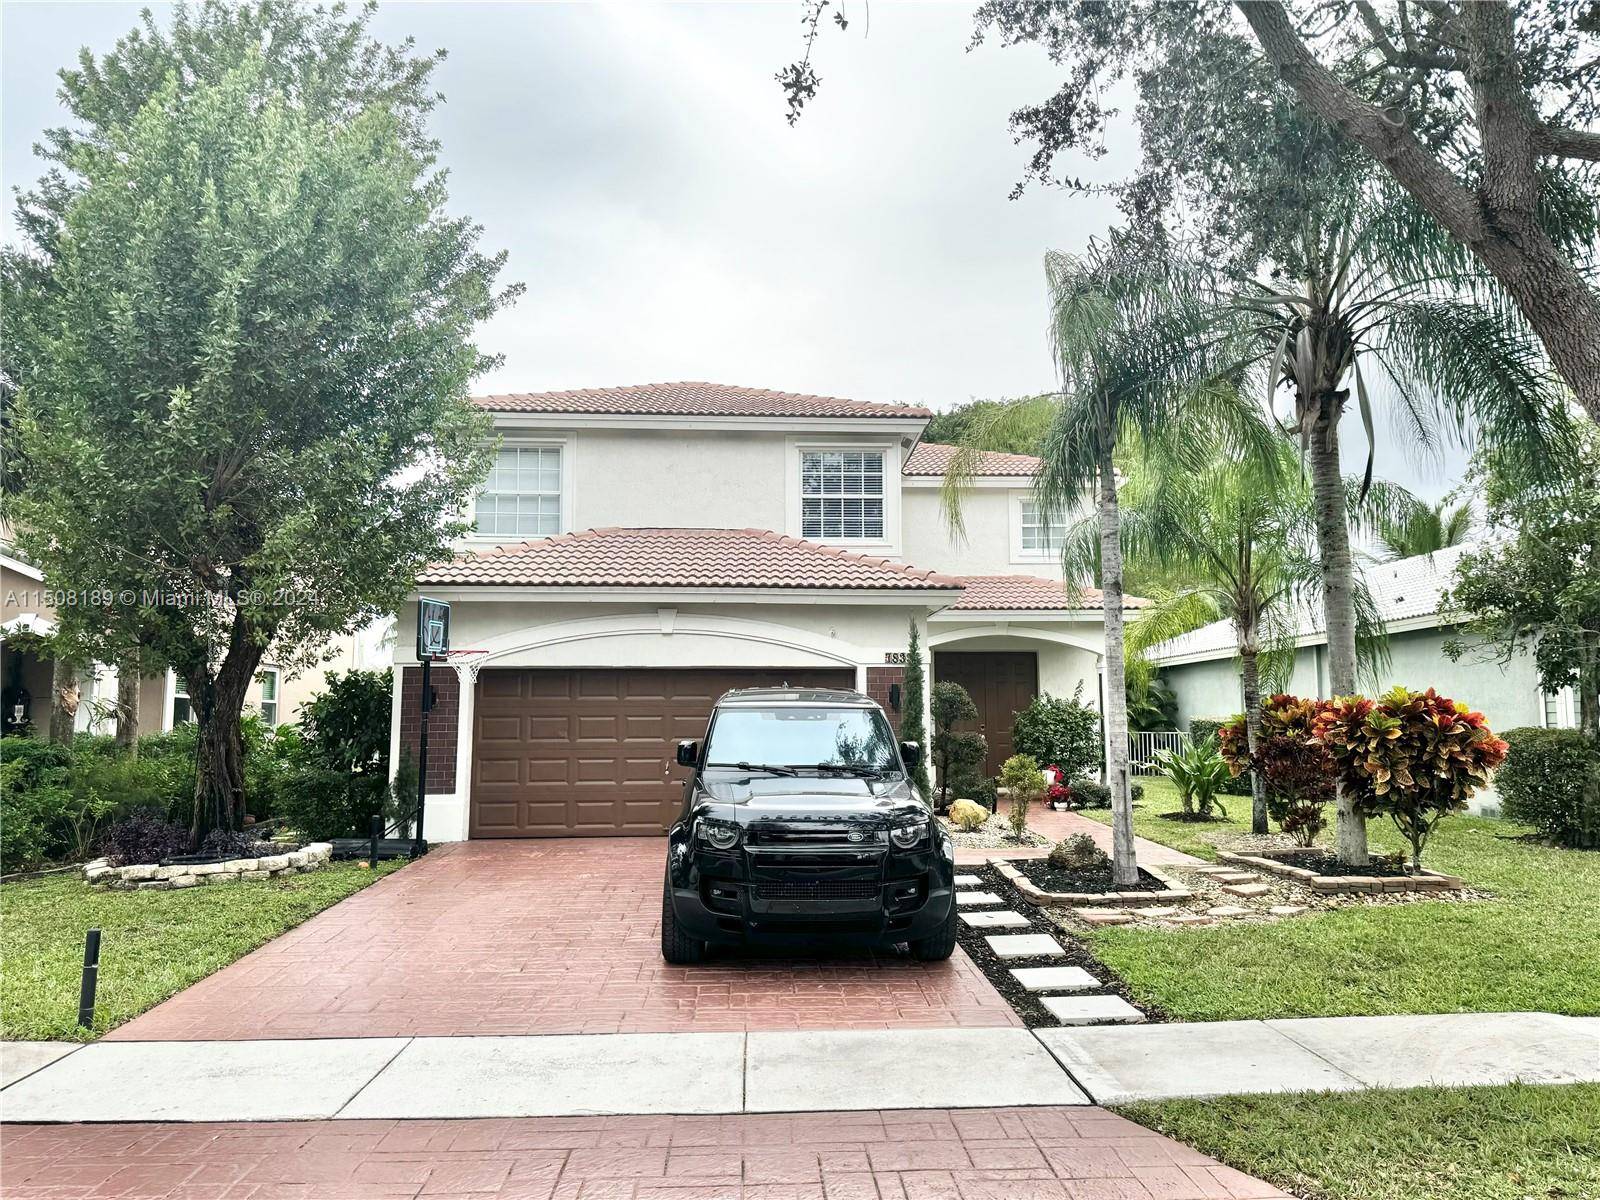 Nestled within the secure confines of Parkside Estates, a gated community in Parkland, stands a beautiful two story house with 5 bedrooms and 2.